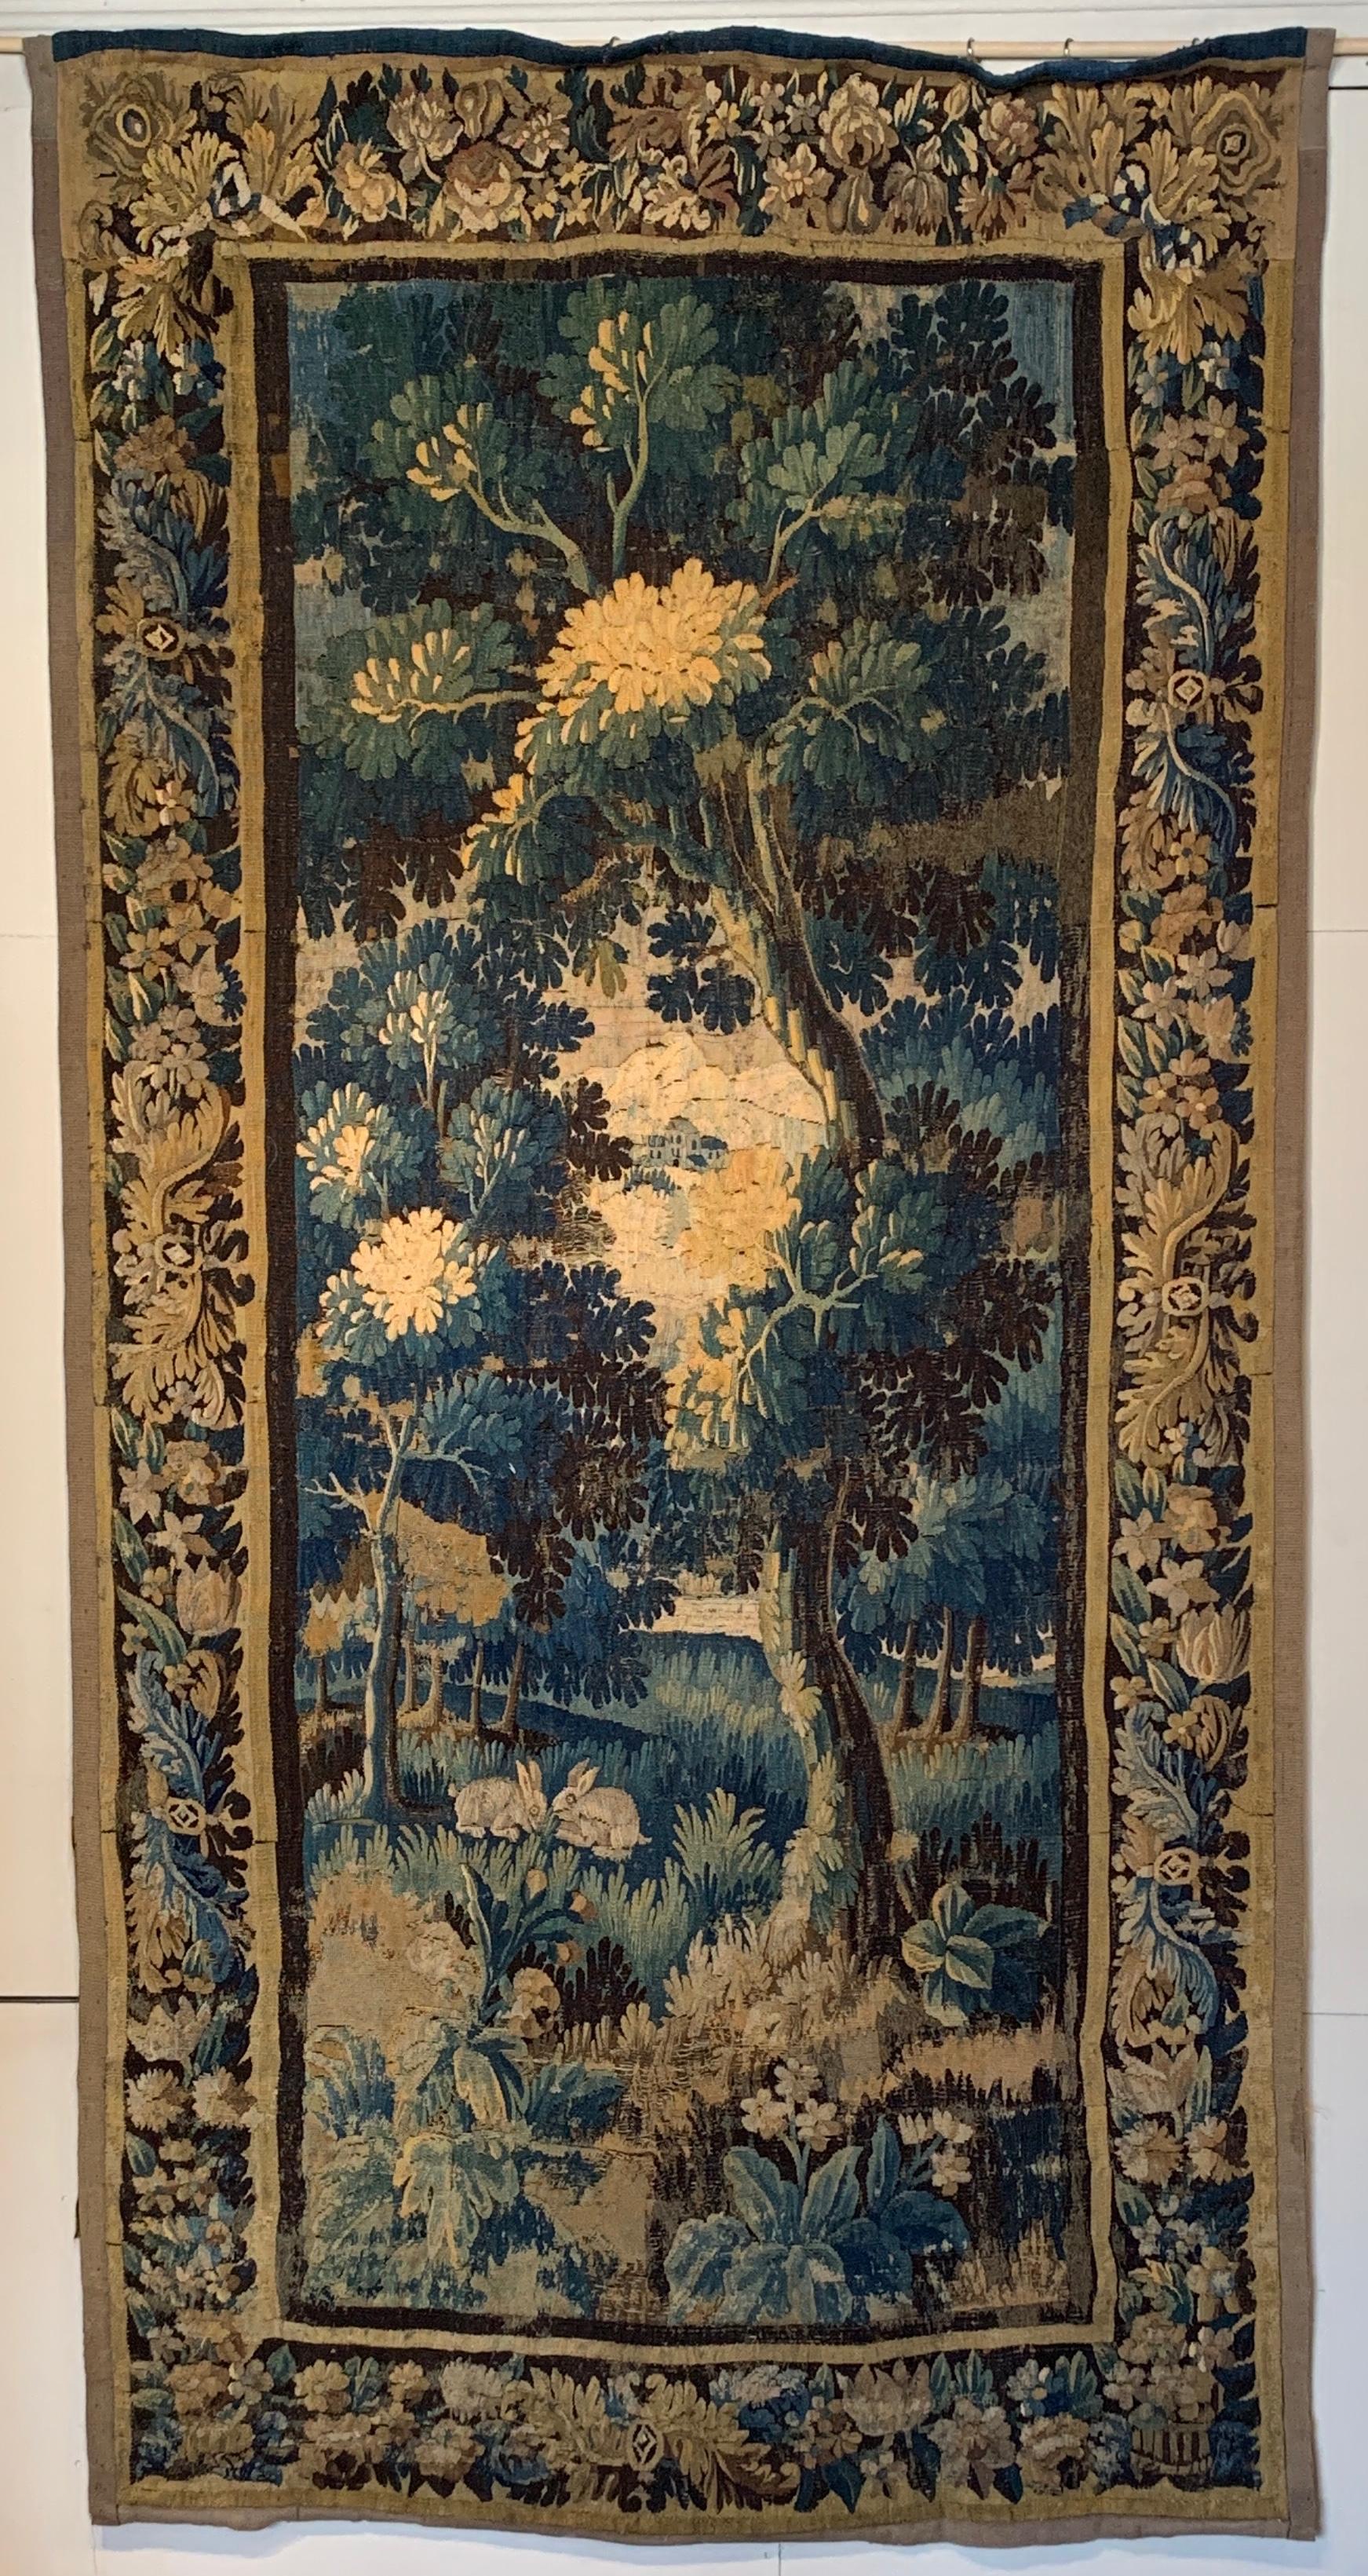 A large early 18th century wool Flemish verdure tapestry depicting an idyllic verdant setting with rabbits and birds, lush foliage and a village in the distance in a traditional palette of soft blues and browns.